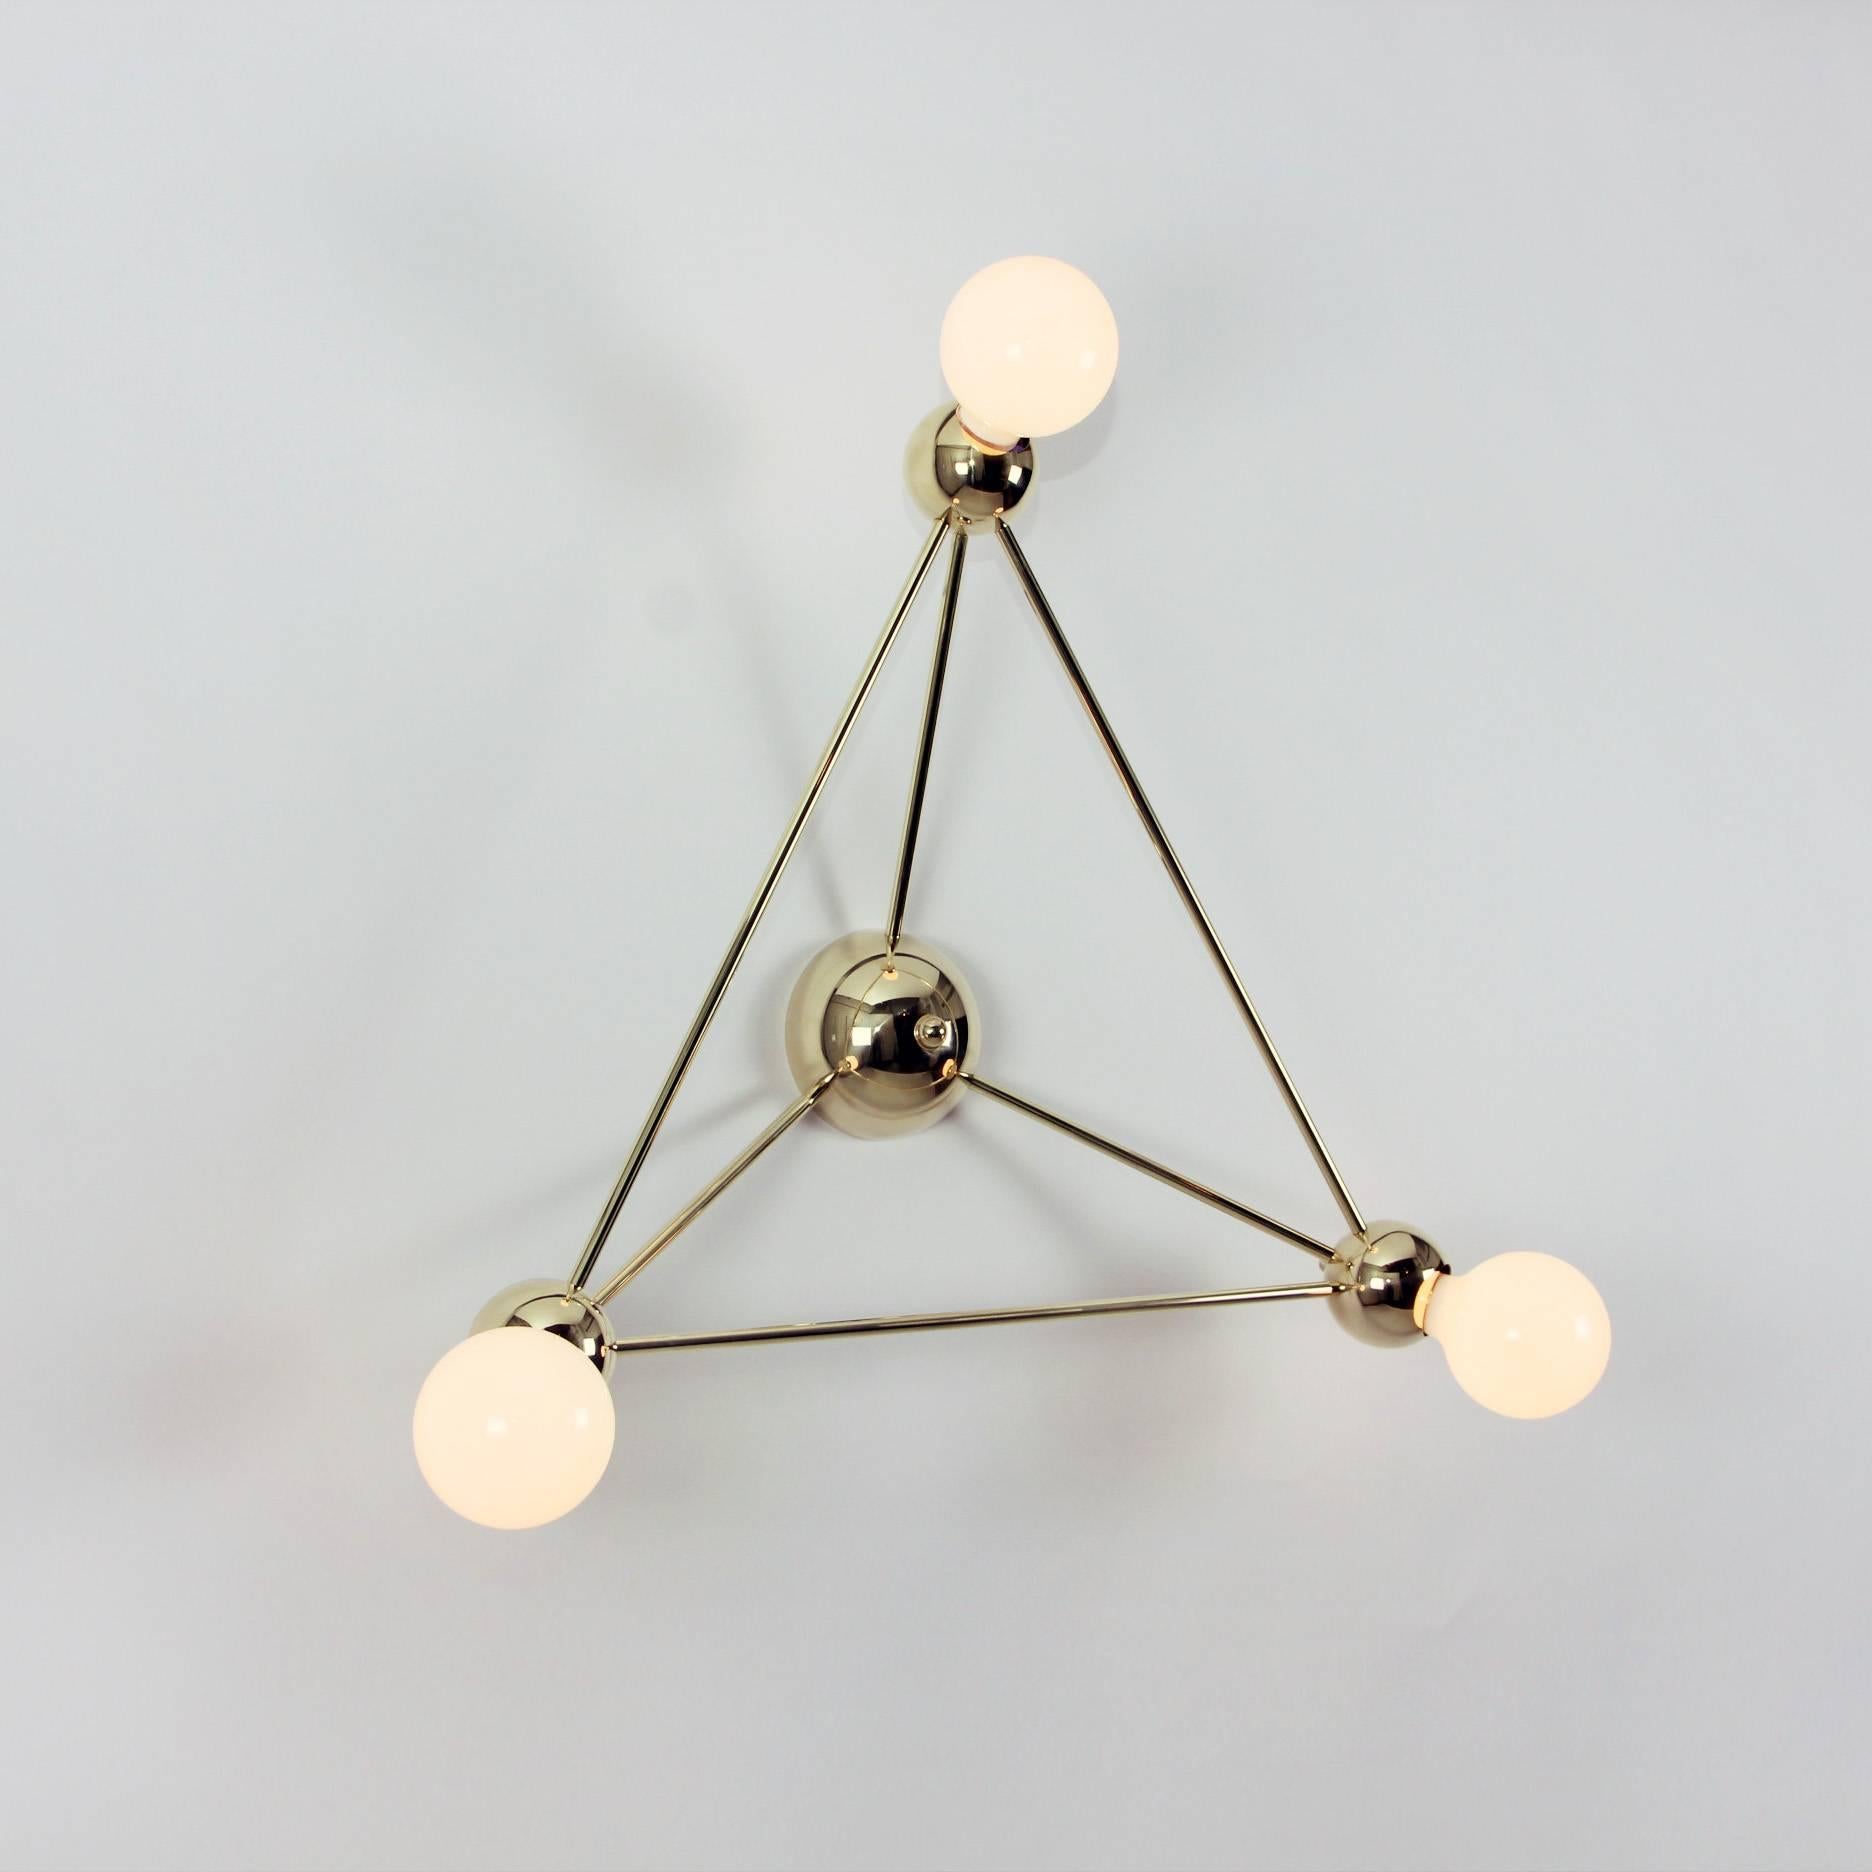 Inspired by 1960s Italian lighting, Lina is an all-brass lighting system designed to create airy geometric fixtures.
Each welded brass sphere joins with solid brass tubing and minimal fastener hardware to form strikingly simple hanging and